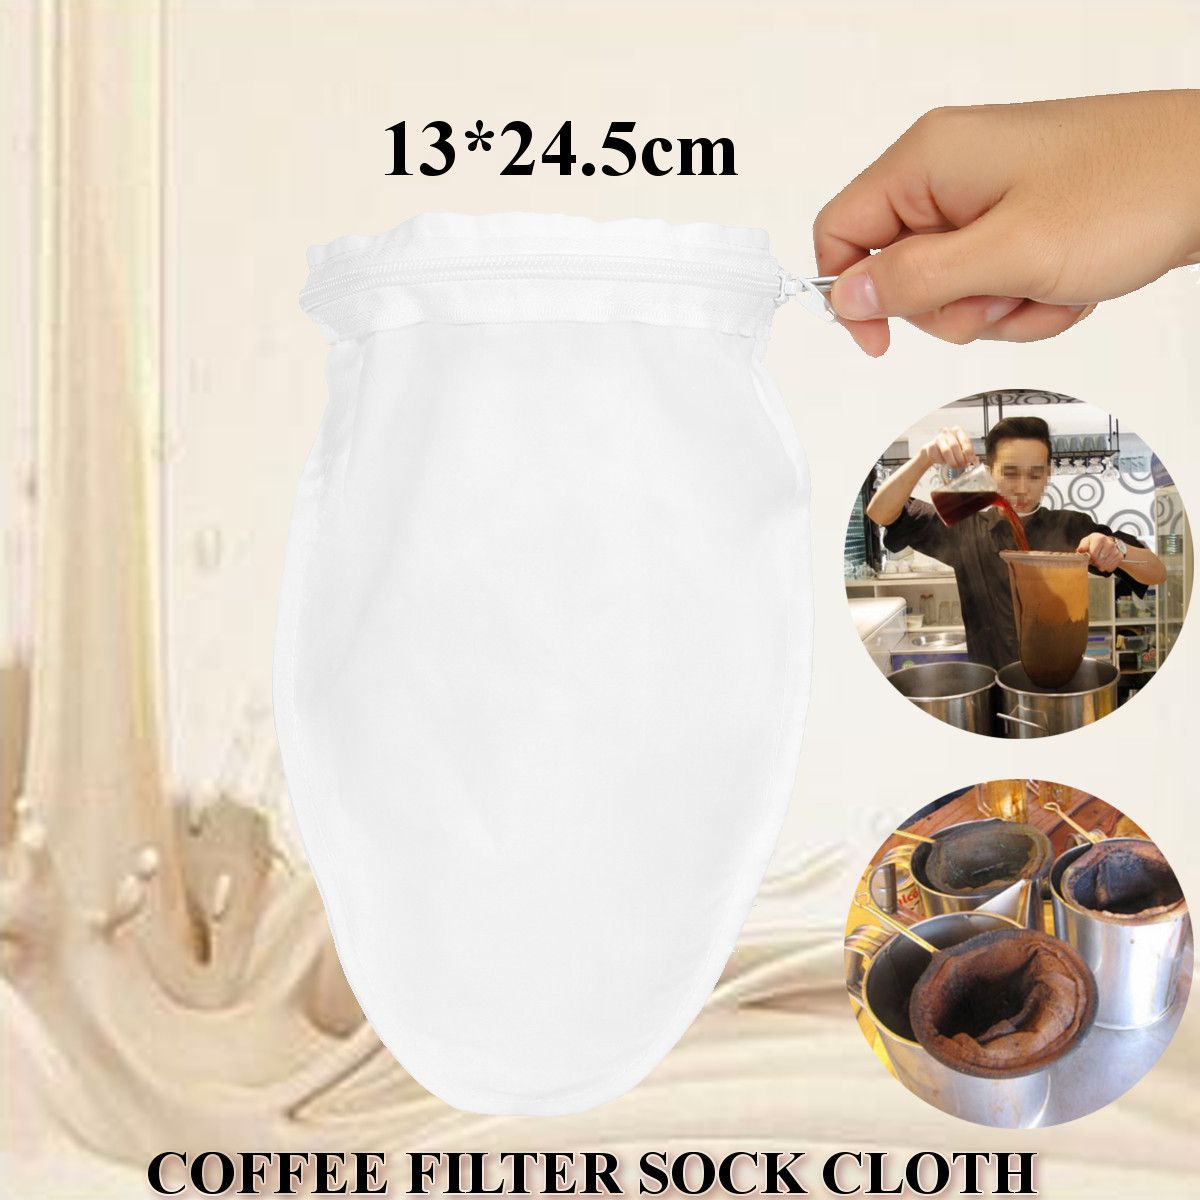 5-Inch-Cotton-Cloth-Strainer-Filter-Thai-Tea-Sock-Strainer-Traditional-Infuser-Coffee-Milk-Making-1211194